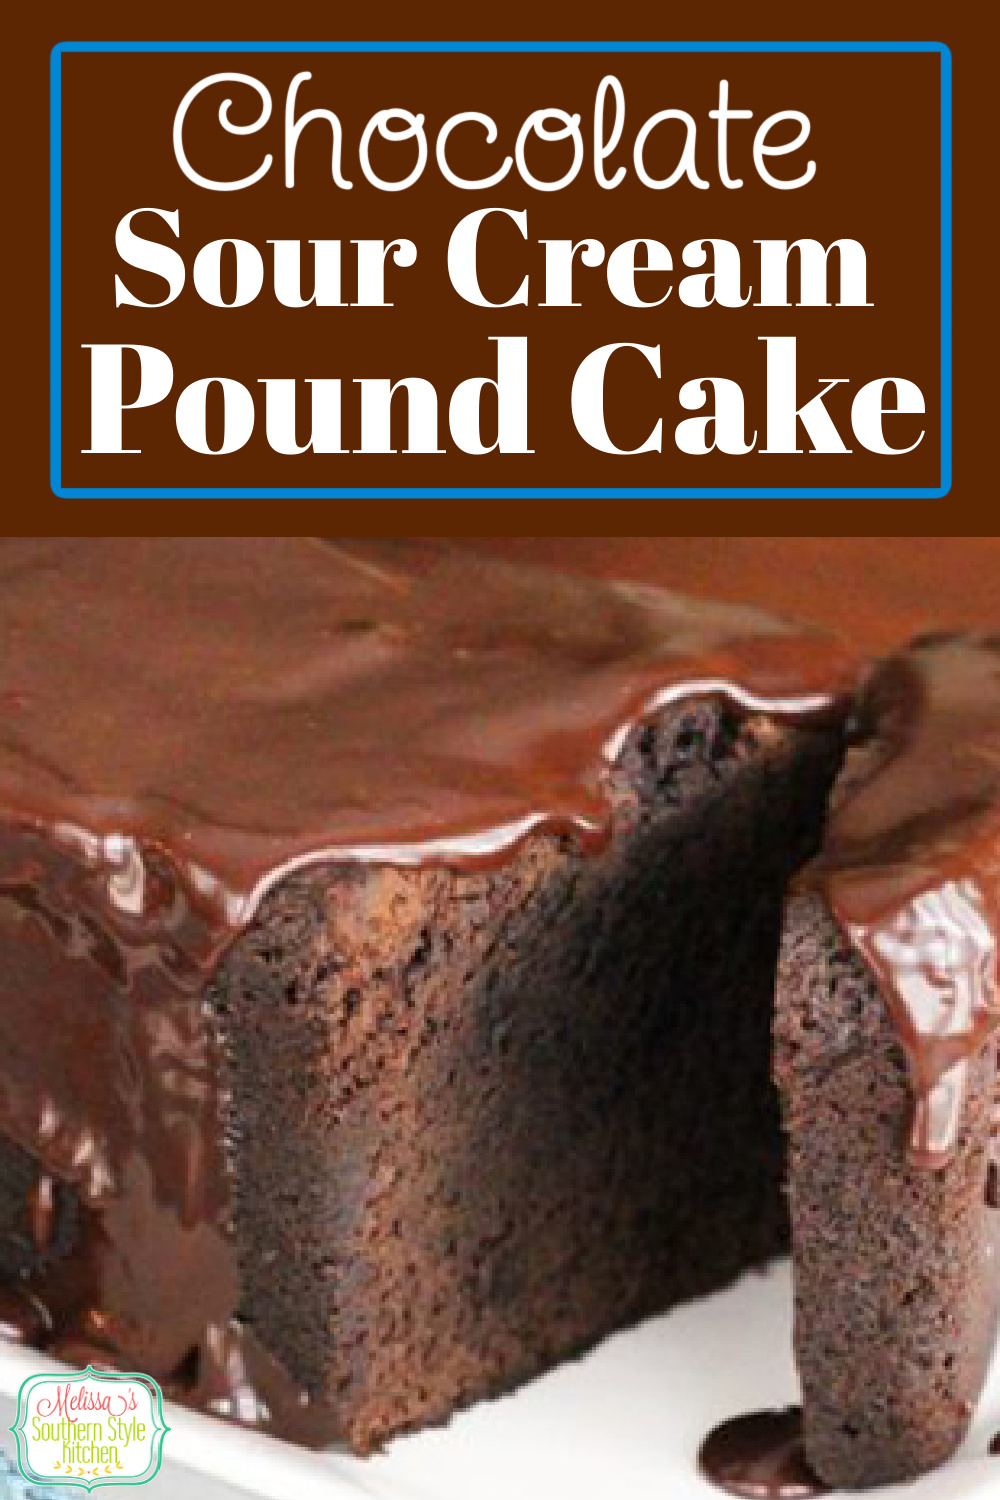 Chocolate fans will flip for this rich and decadent Chocolate Sour Cream Pound Cake #chocolatepoundcake #chocolatecake #chocolste #cakes #cakerecipes #southernpoundcakerecipes #desserts #holidaybaking #chocolterecipes #dessertfoodrecipes #christmascakes #thanksgiving #birthdaycake #southernfood #southernrecipes #poundcakes via @melissasssk